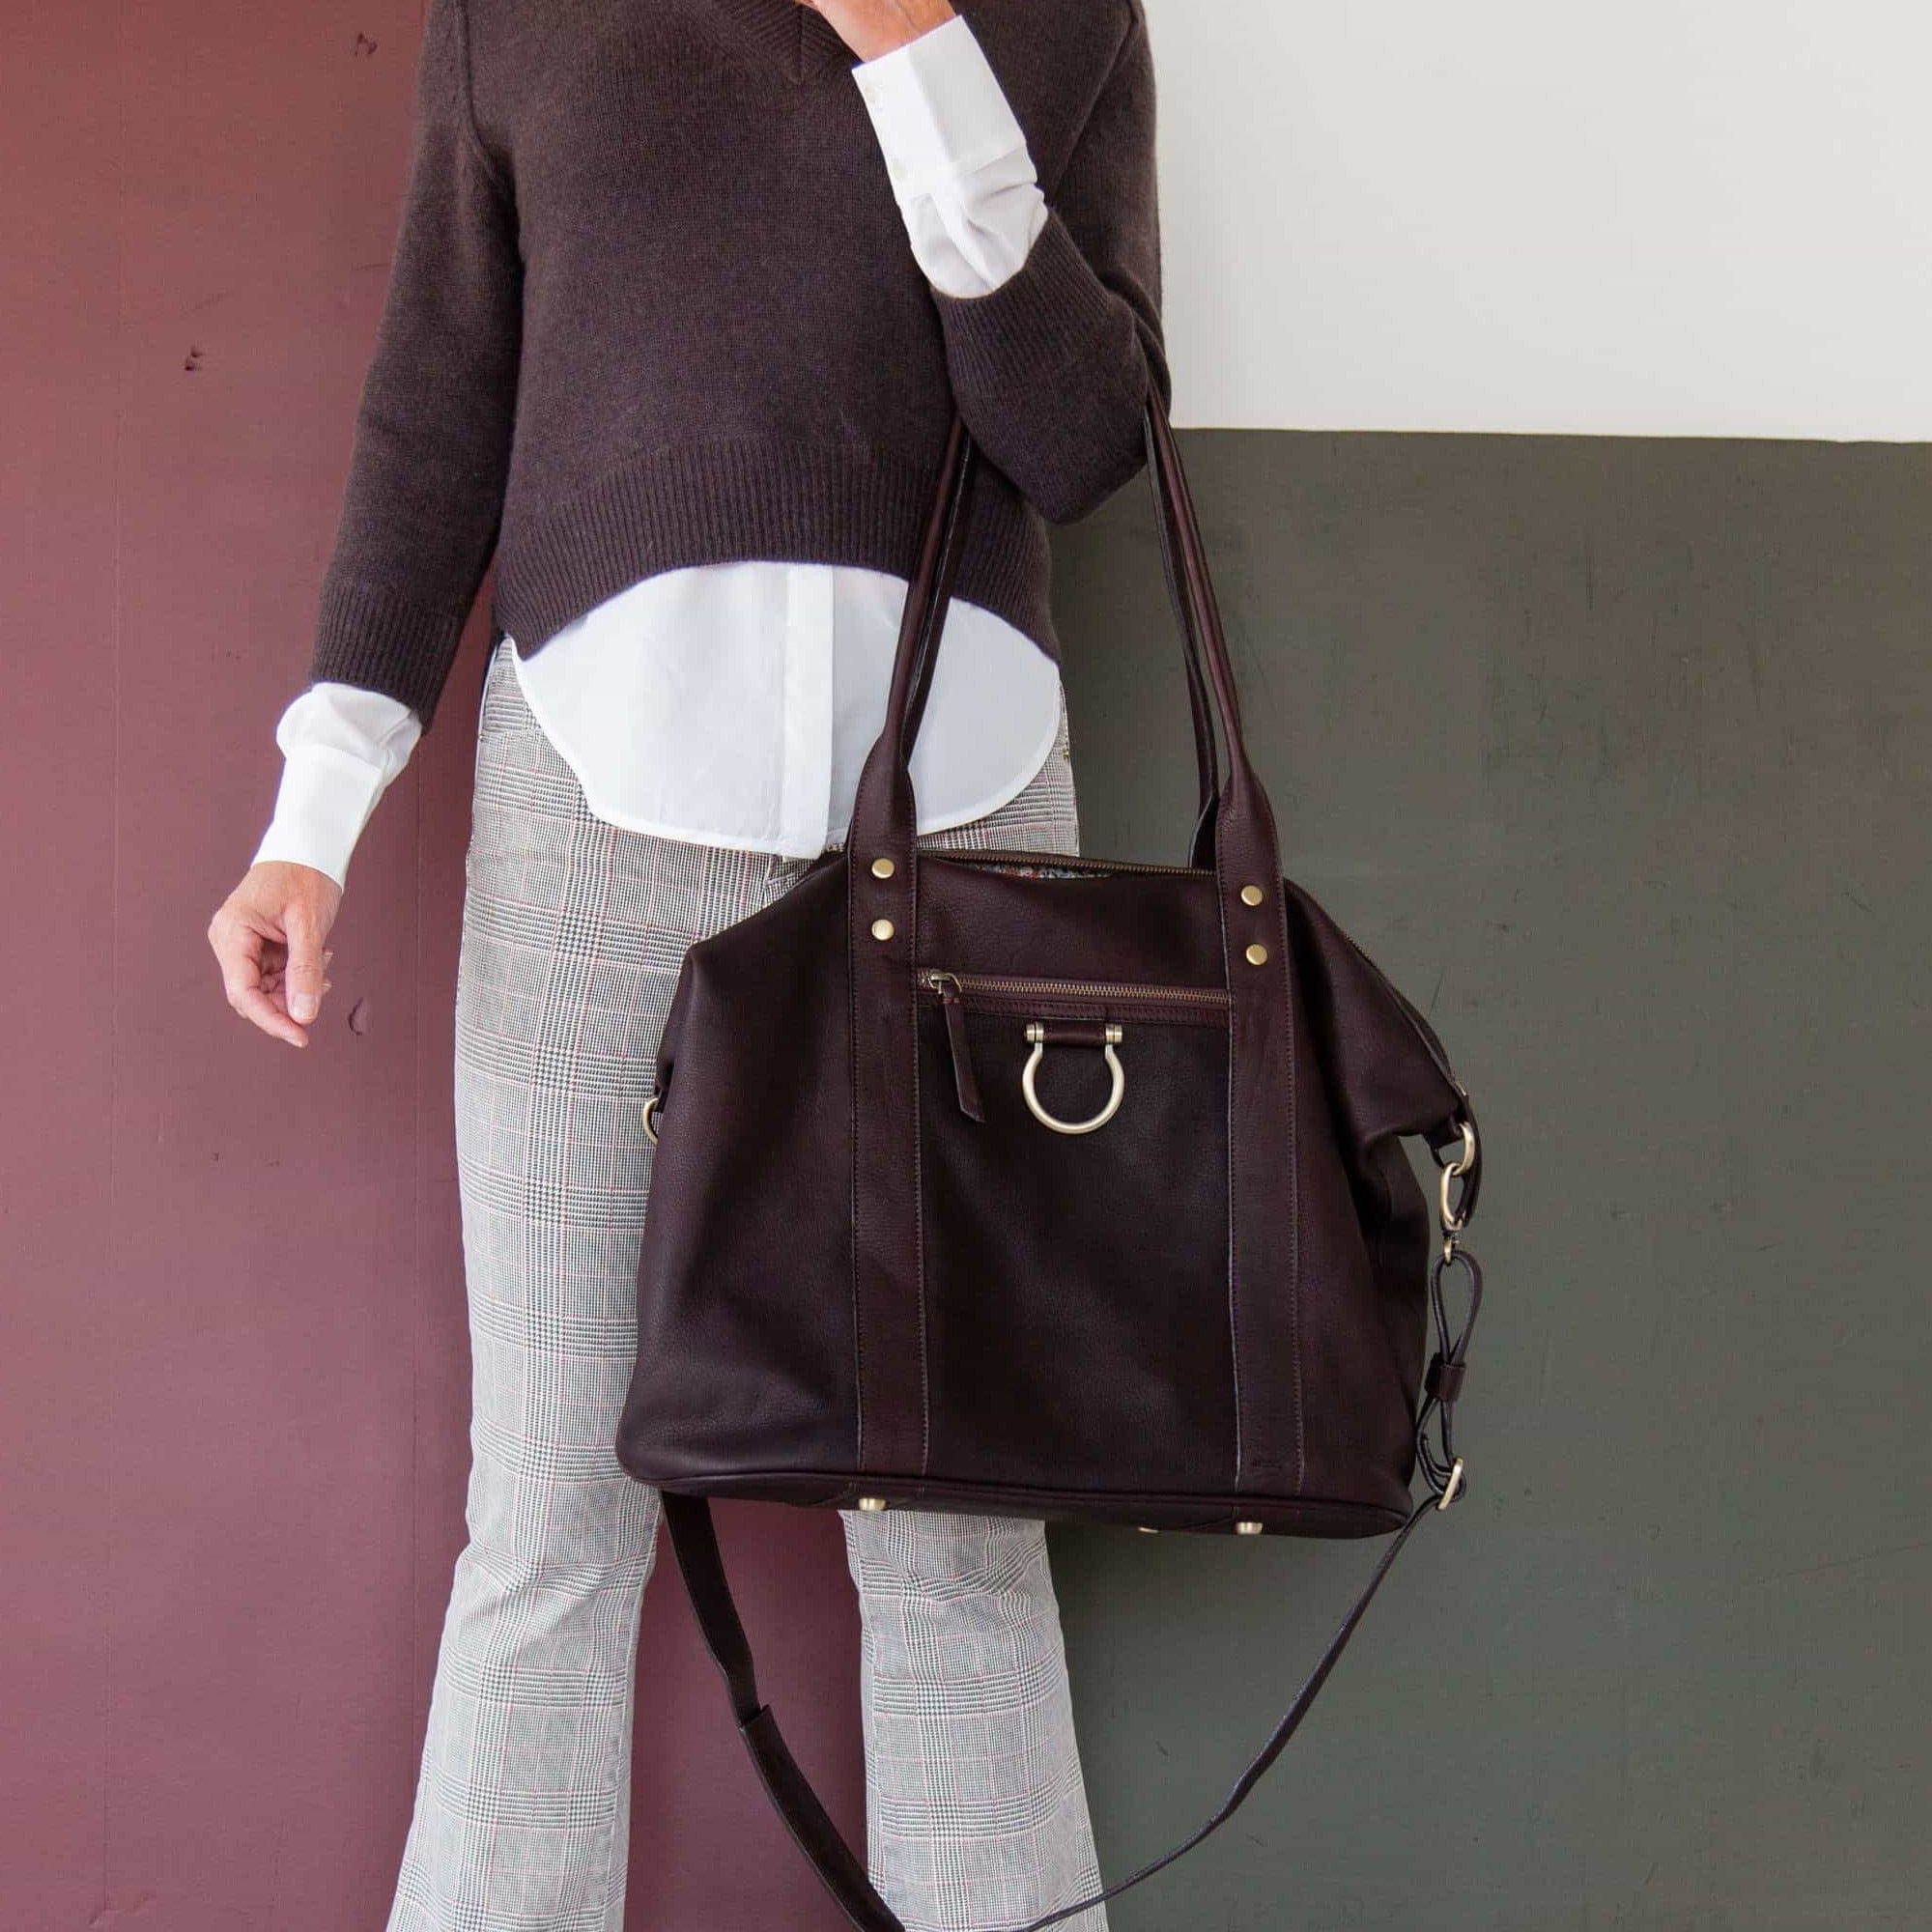 Hold the So Honey weekender tote in chocolate brown raw leather by the top handles.